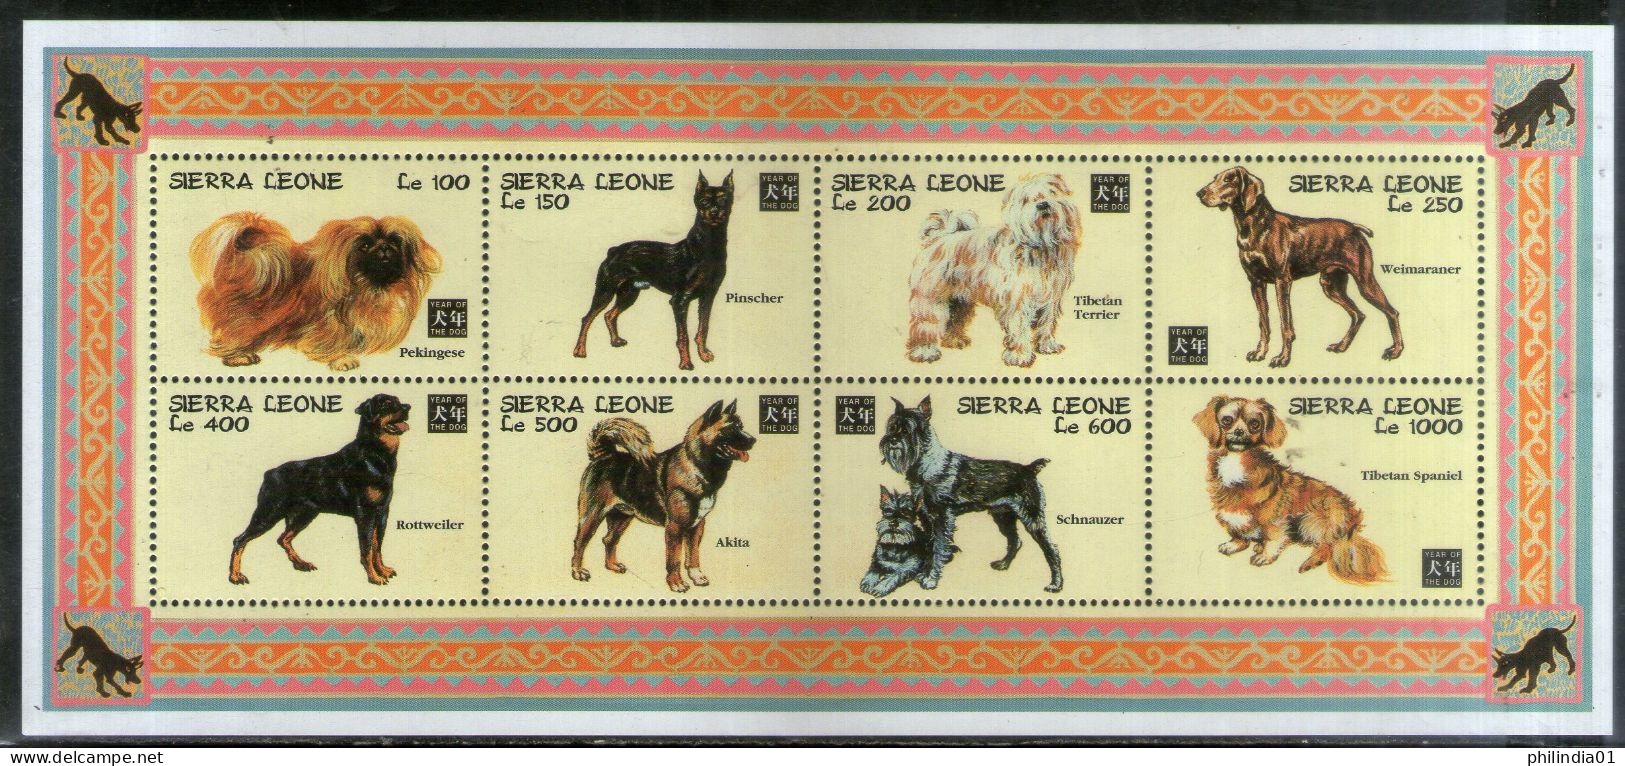 Sierra Leone 1994 Chinese New Year Dogs Animals Sc 1717 Sheetlet MNH # 6330 - Chiens